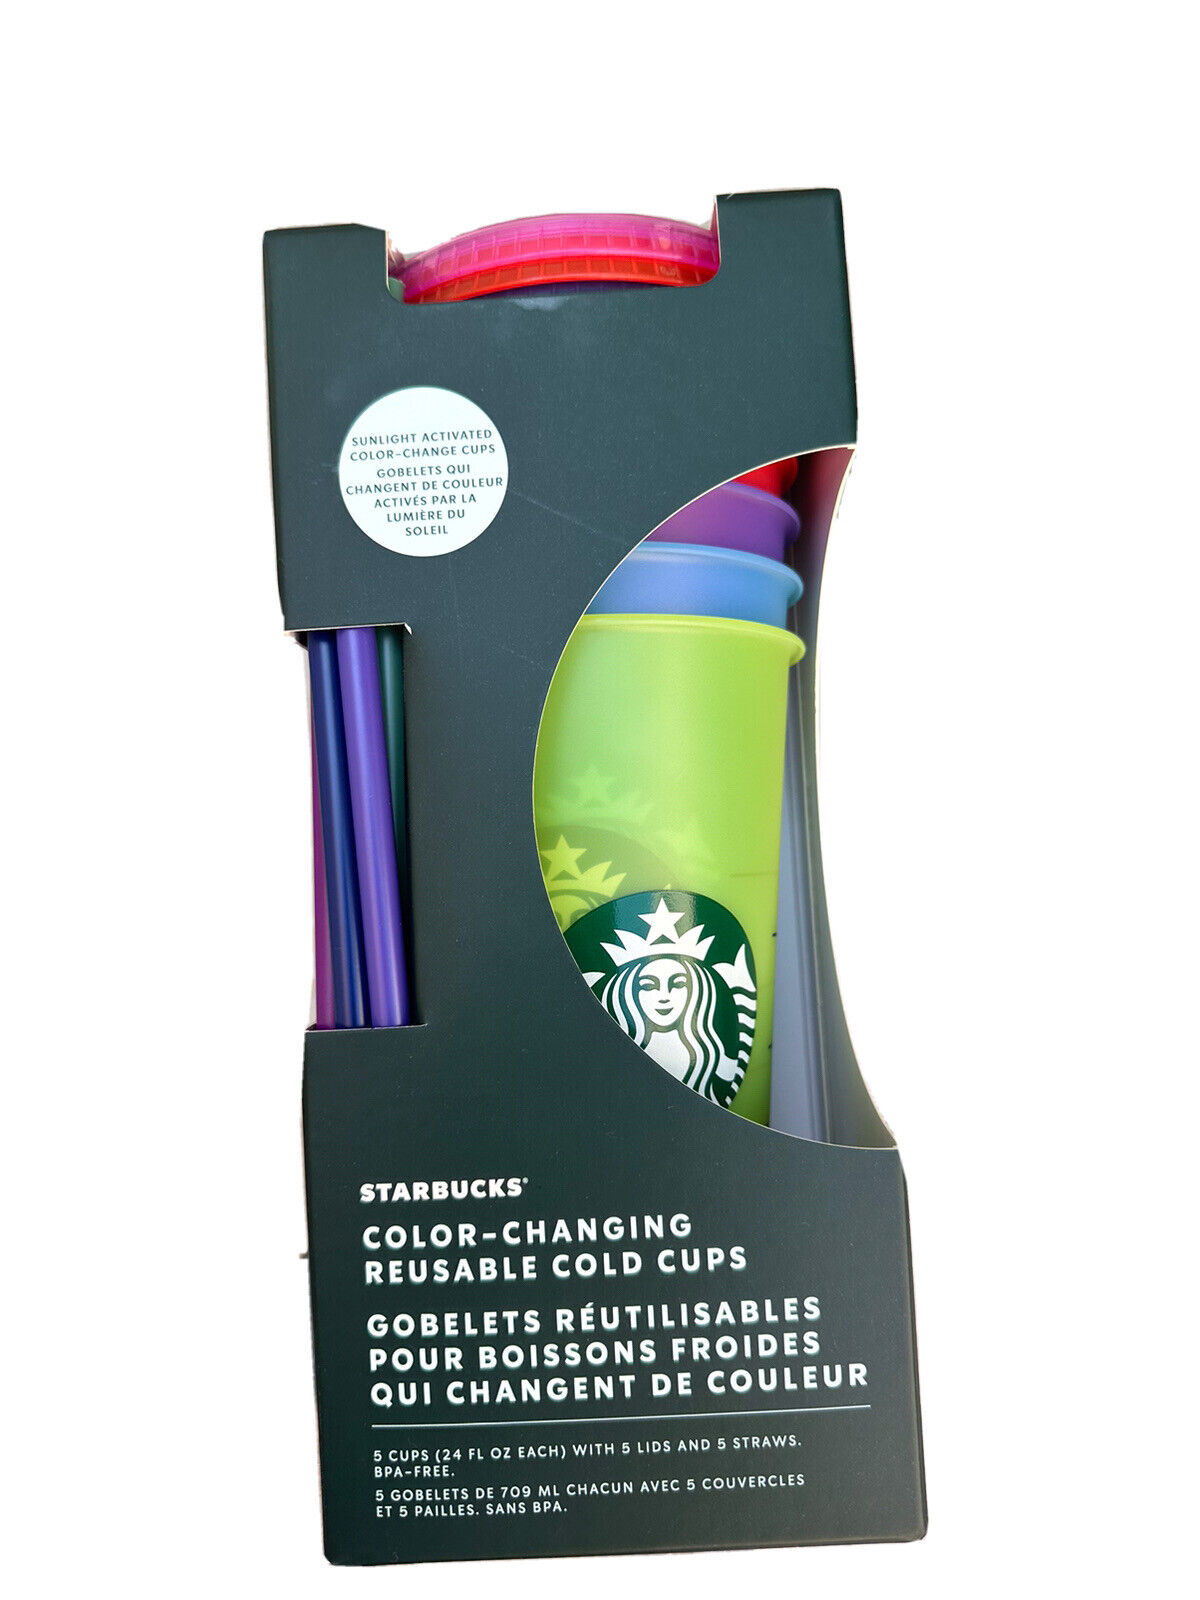 Starbucks All Year Reusable Cold Cups 5 Pack Color Changing w/ Lids and Straws